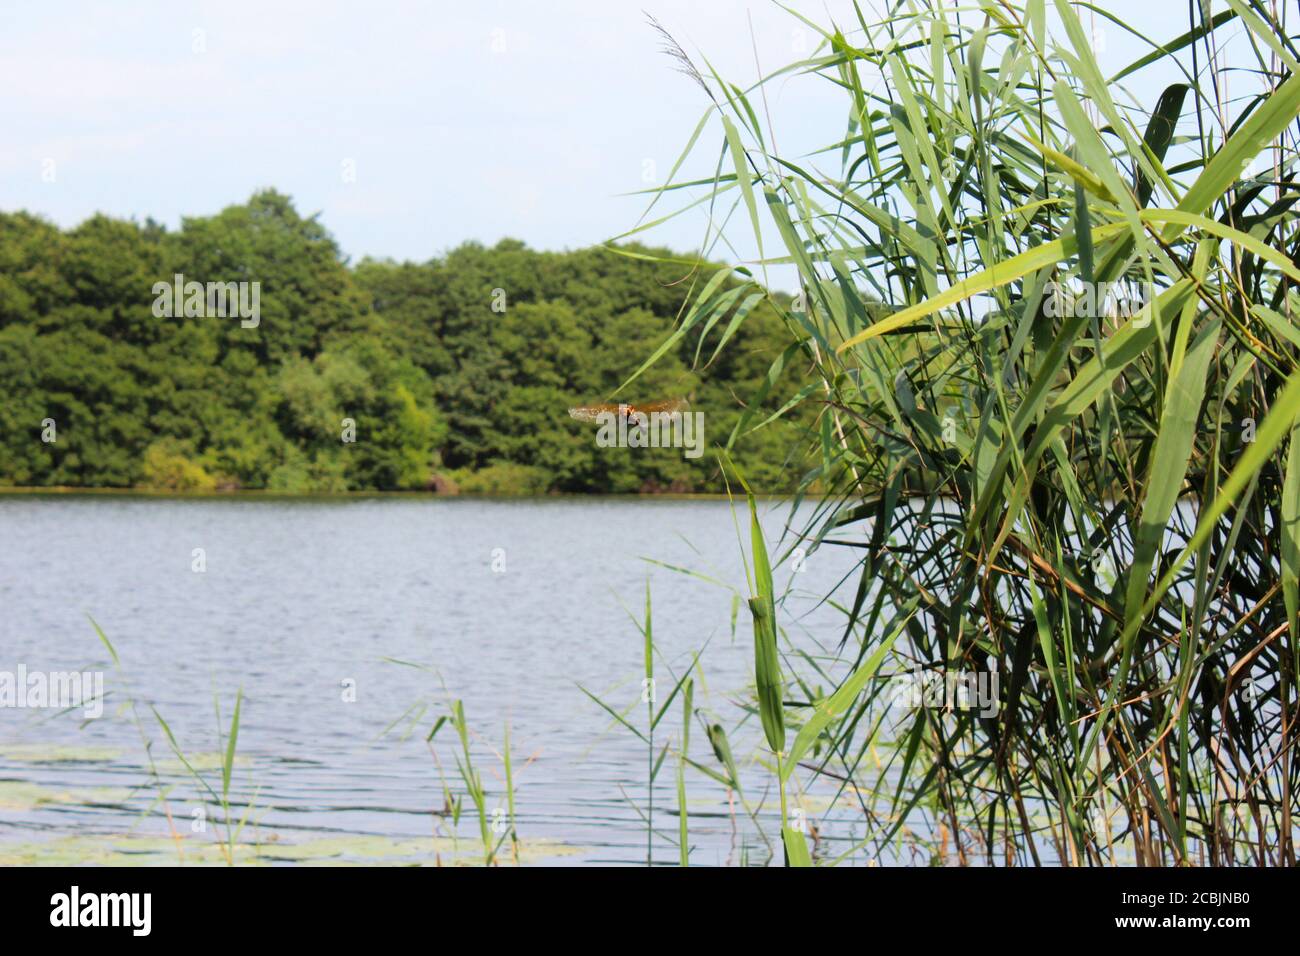 Scenery of Pickmere lake, inc reeds and trees with a flying dragonfly in Cheshire, England Stock Photo